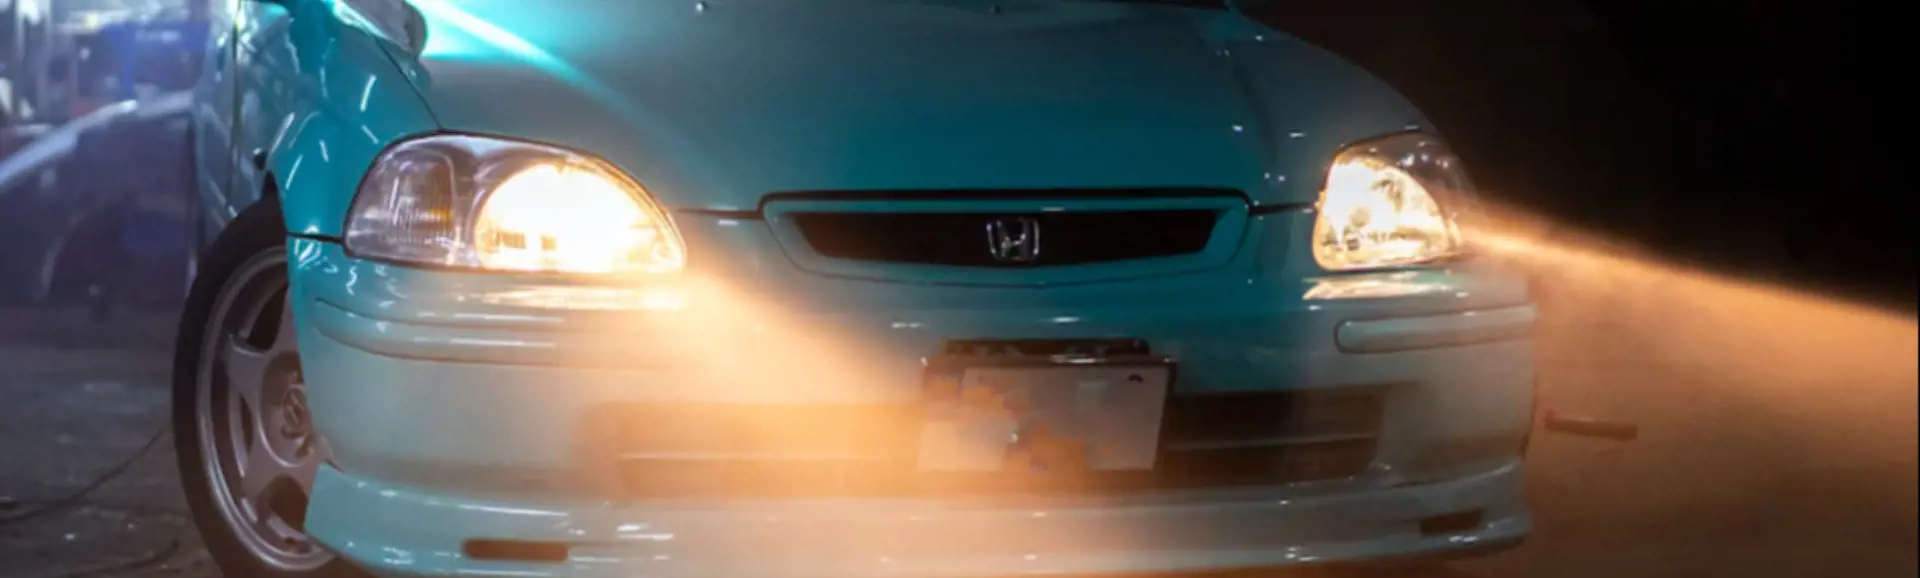 Improving Visibility with DLP® Headlights